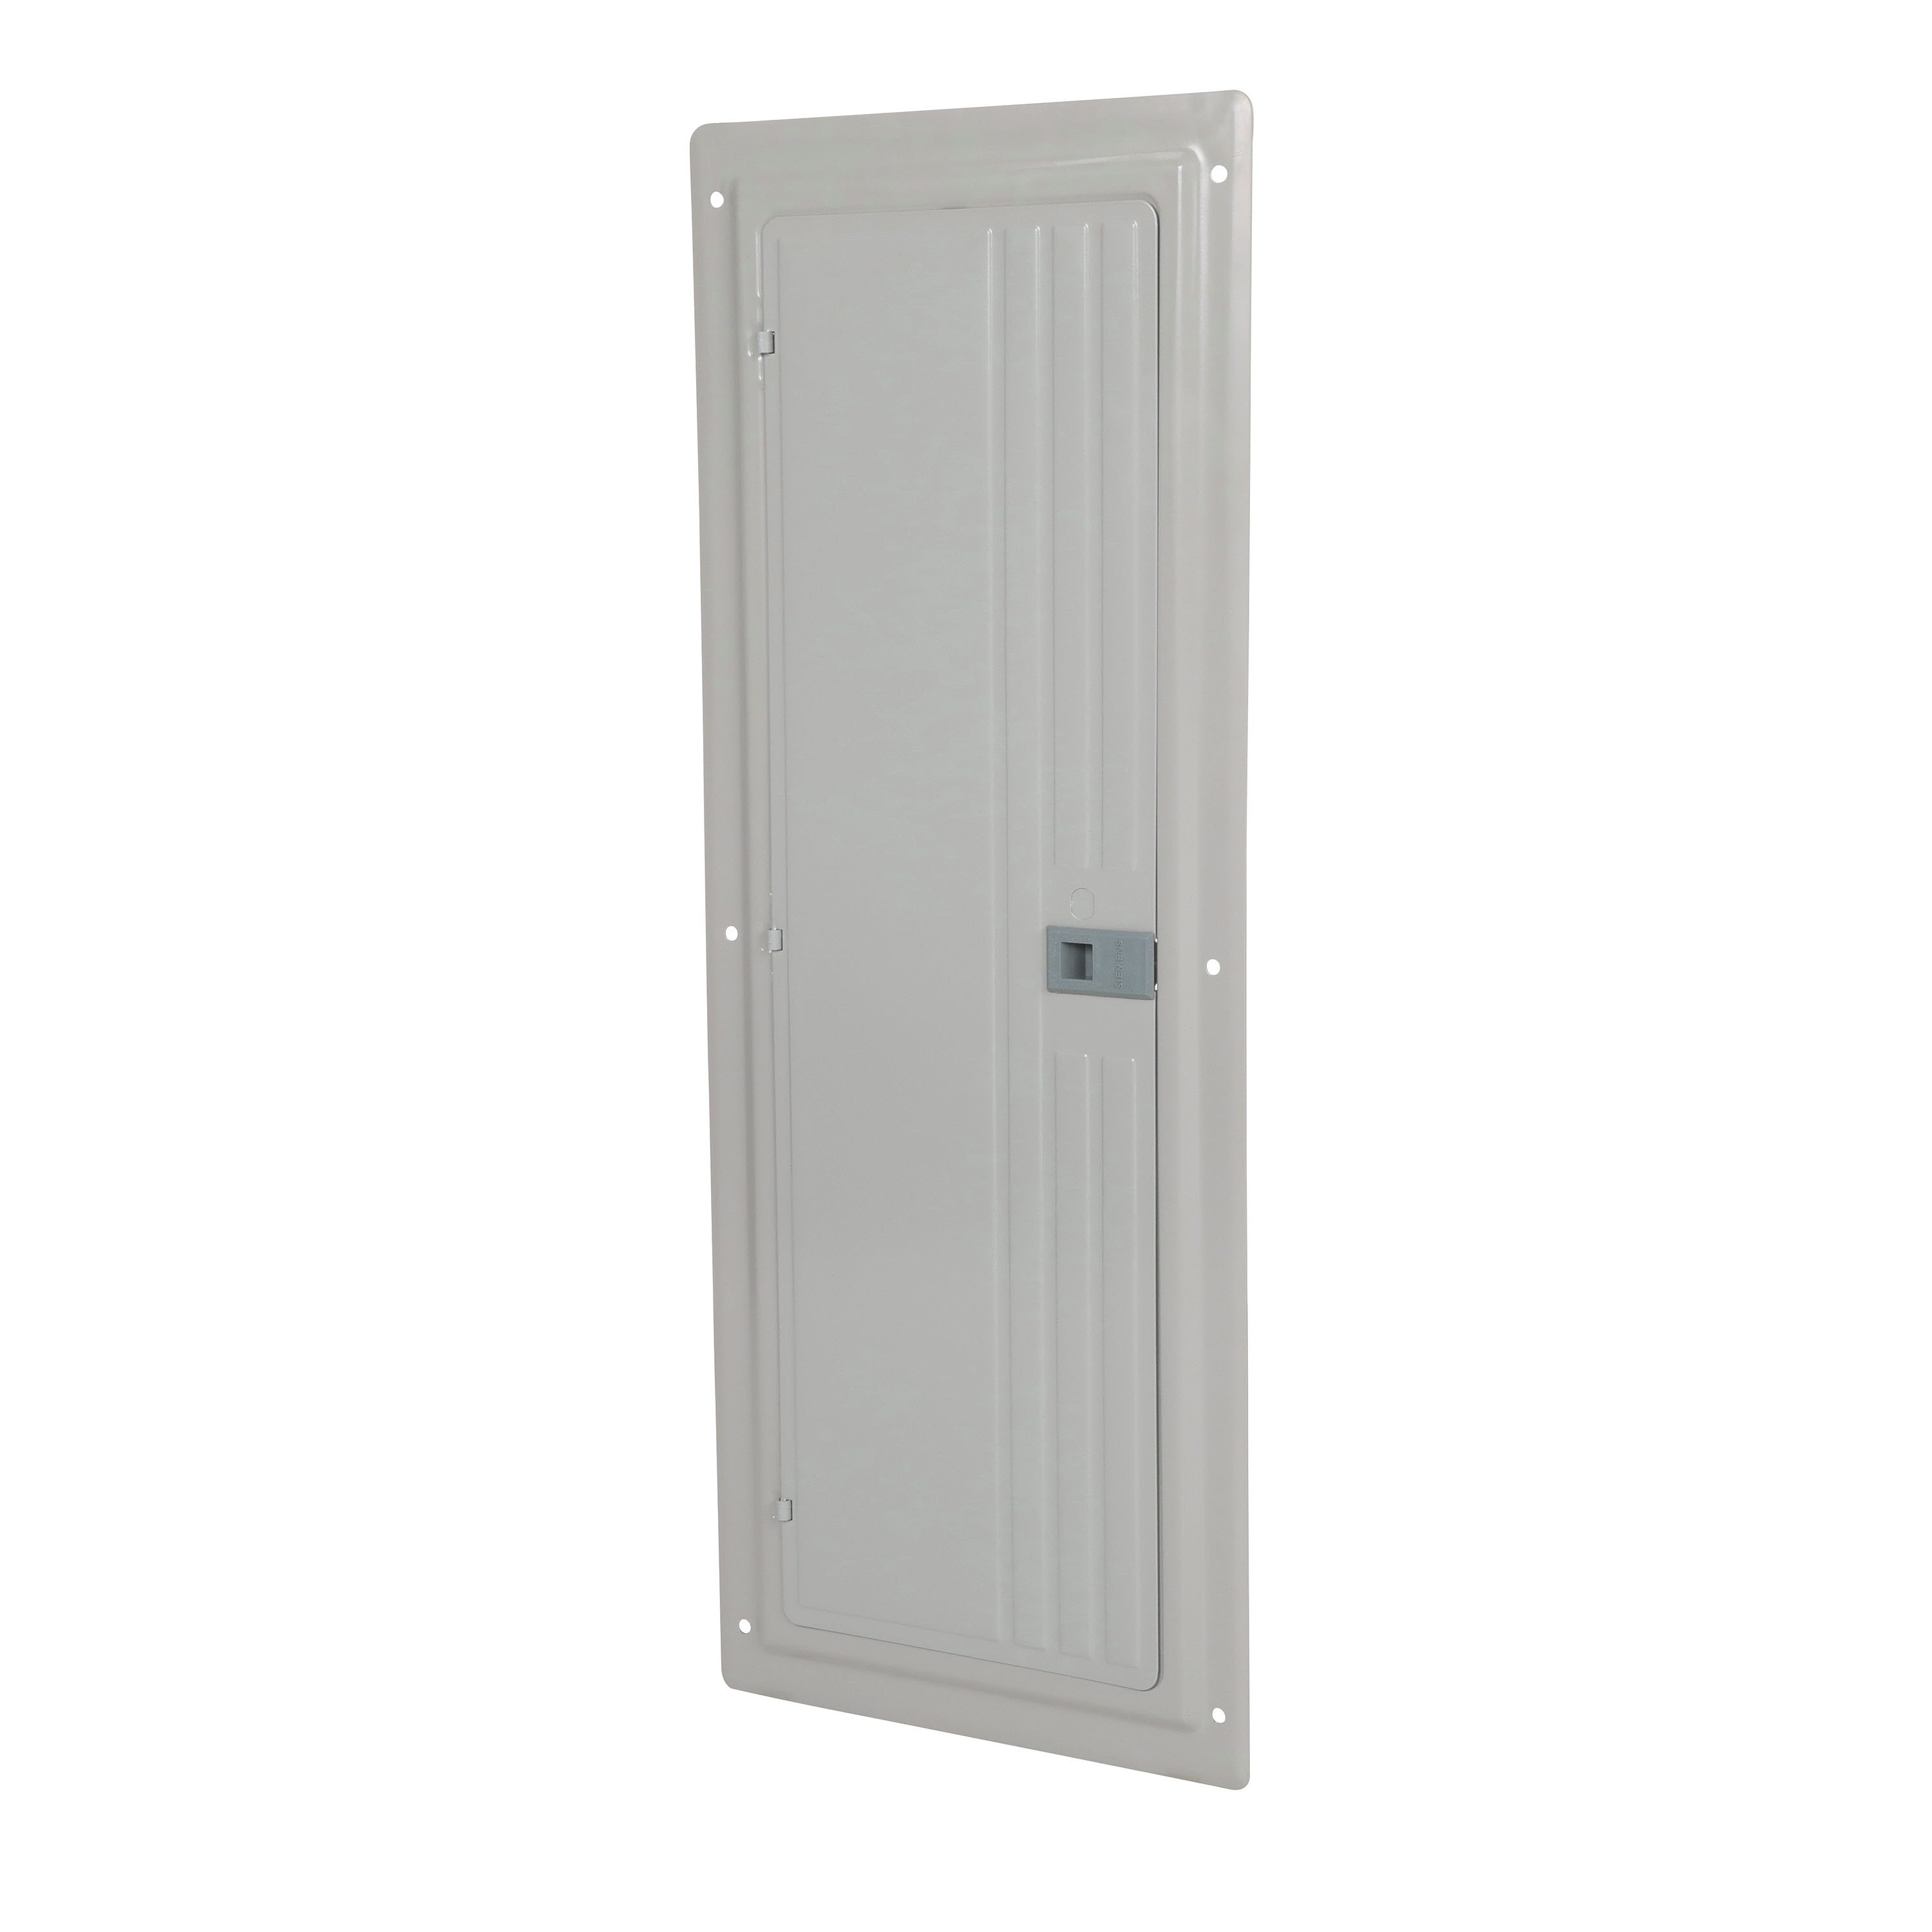 Siemens Low Voltage Residential Specialty Load Centers Trims. Load Centers Application Residential Cover Type PL Series Size (H x W x D) 941.625 Mounting Combination Enclosure Indoor Type 1